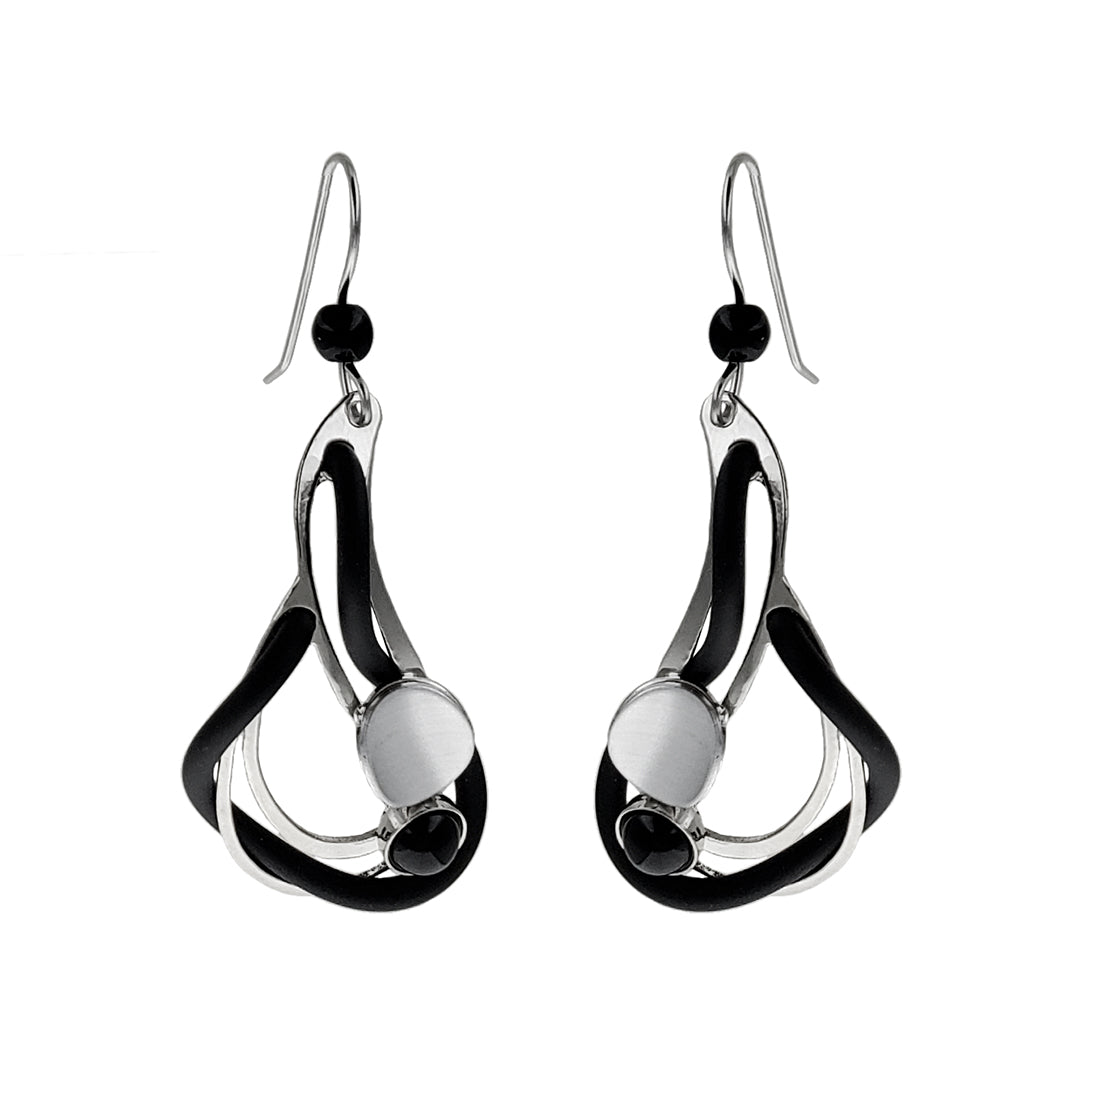 Christophe Poly Soothing Swirly Silver Black Earrings